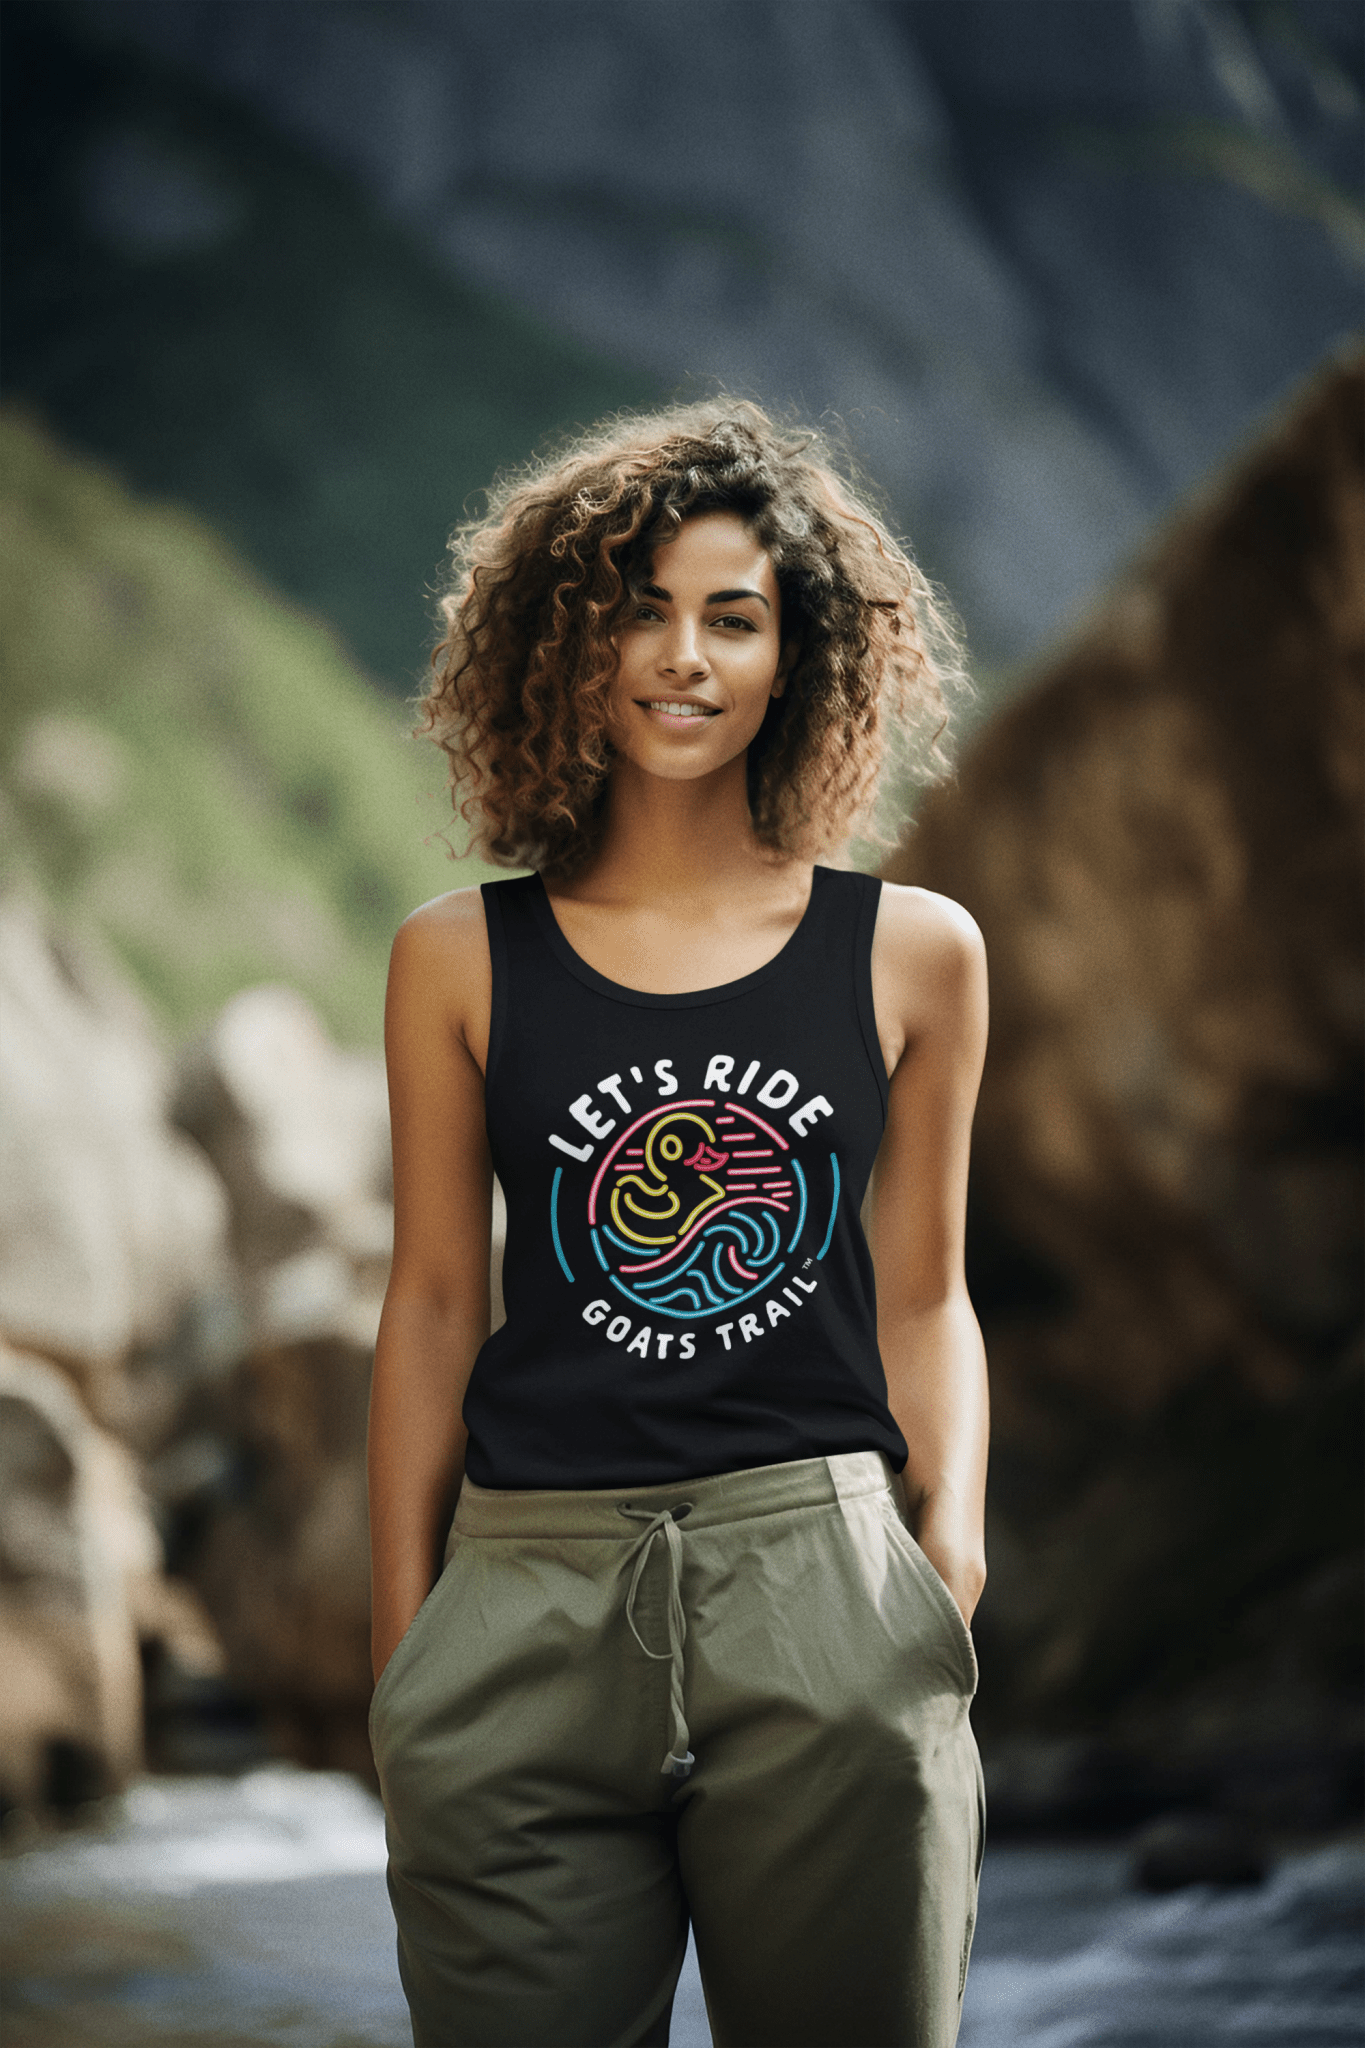 Women's Neon Duck Let's Ride Tank Top - Goats Trail Off-Road Apparel Company